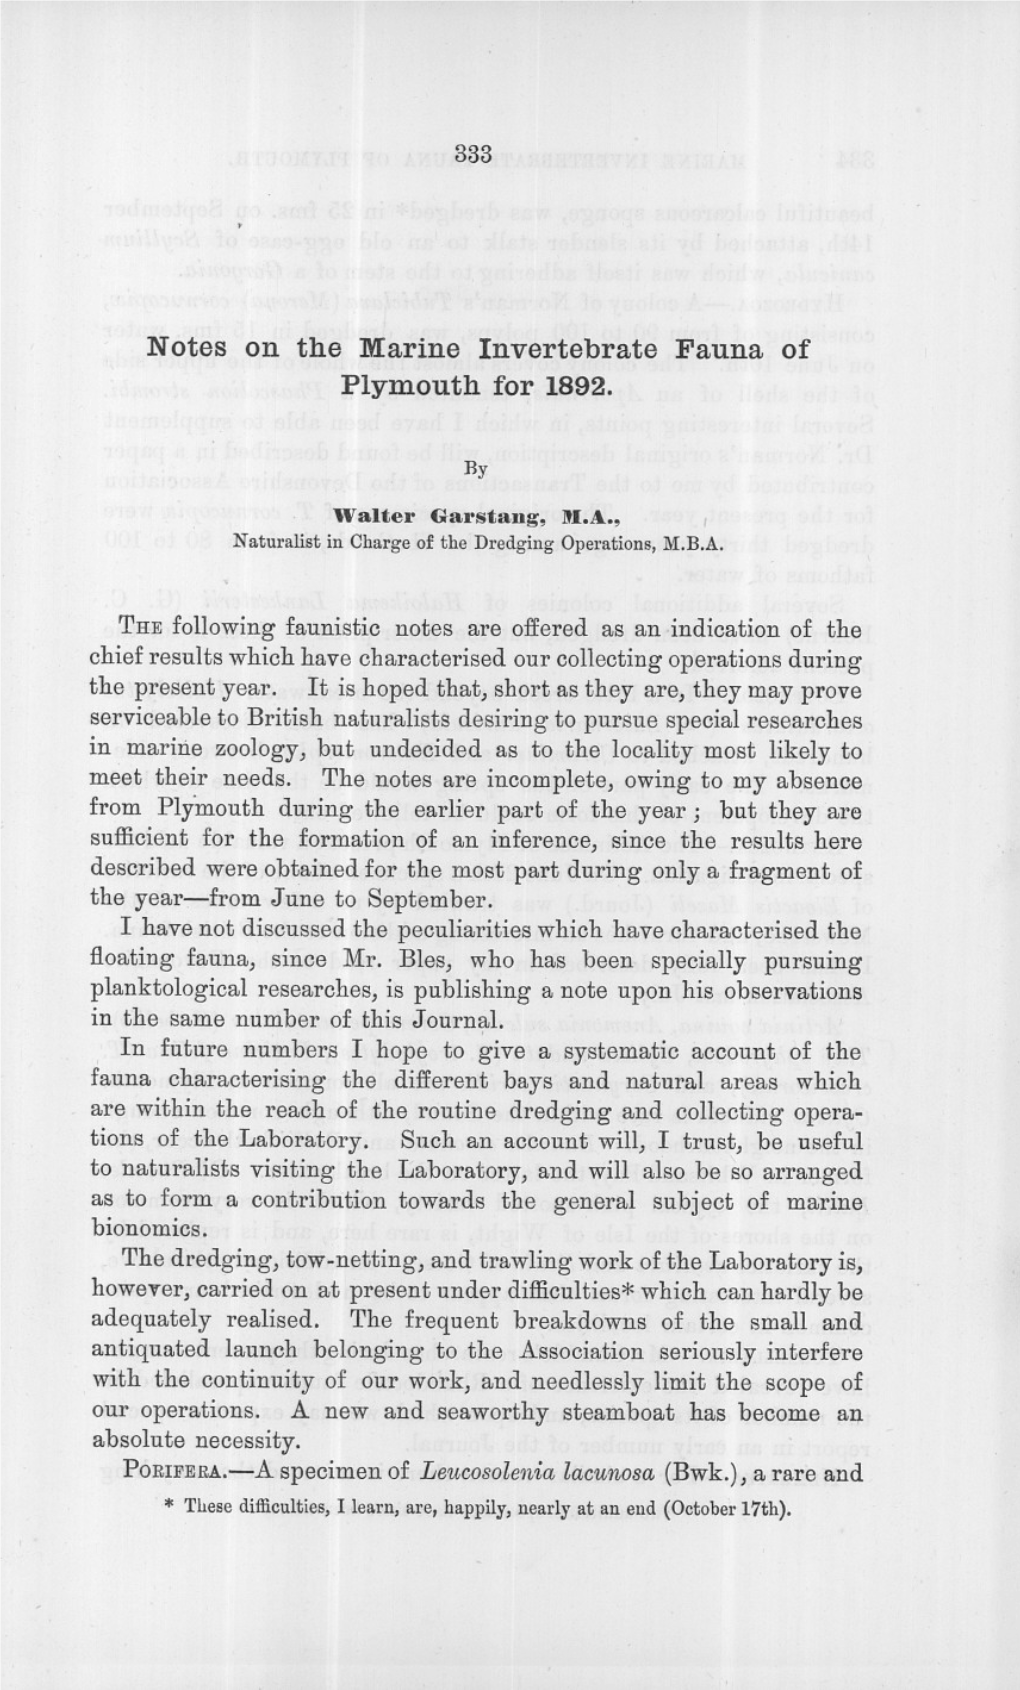 Notes on the Marine Invertebrate Fauna of Plymouth for 1892